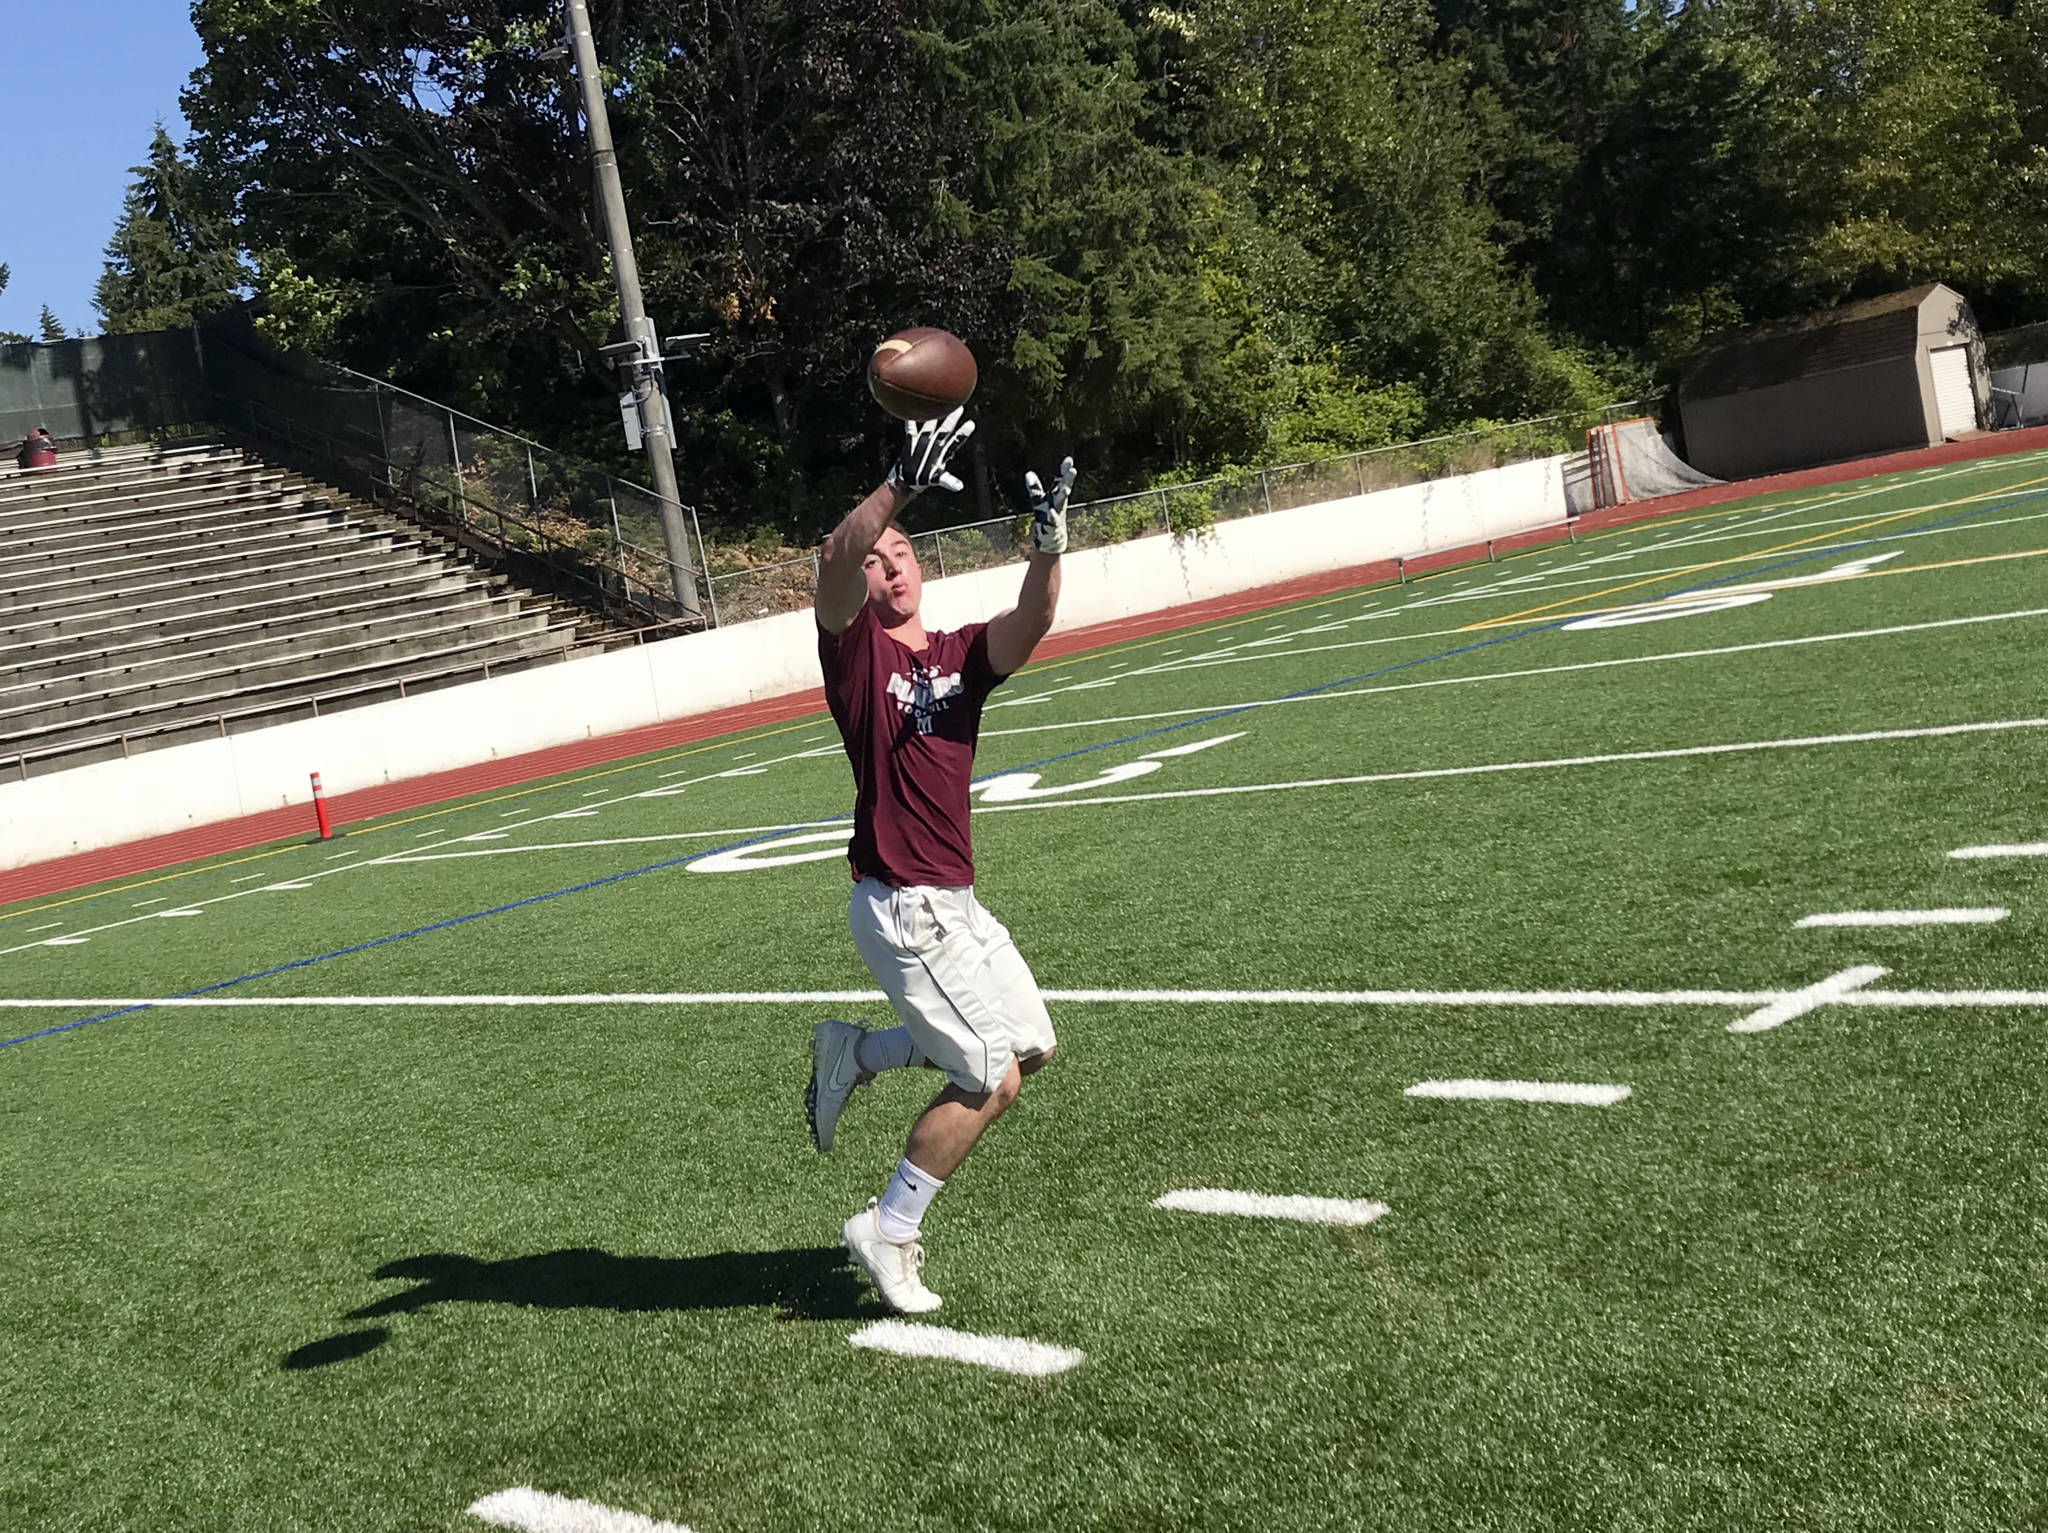 Mercer Island senior football player John Majewski hauls in a pass during a player led team workout on July 18 on Mercer Island. The Islanders, who finished with an overall record of 7-4 during the 2018 season, are looking to build on last year’s sensational season on the gridiron.                                Shaun Scott, staff photo